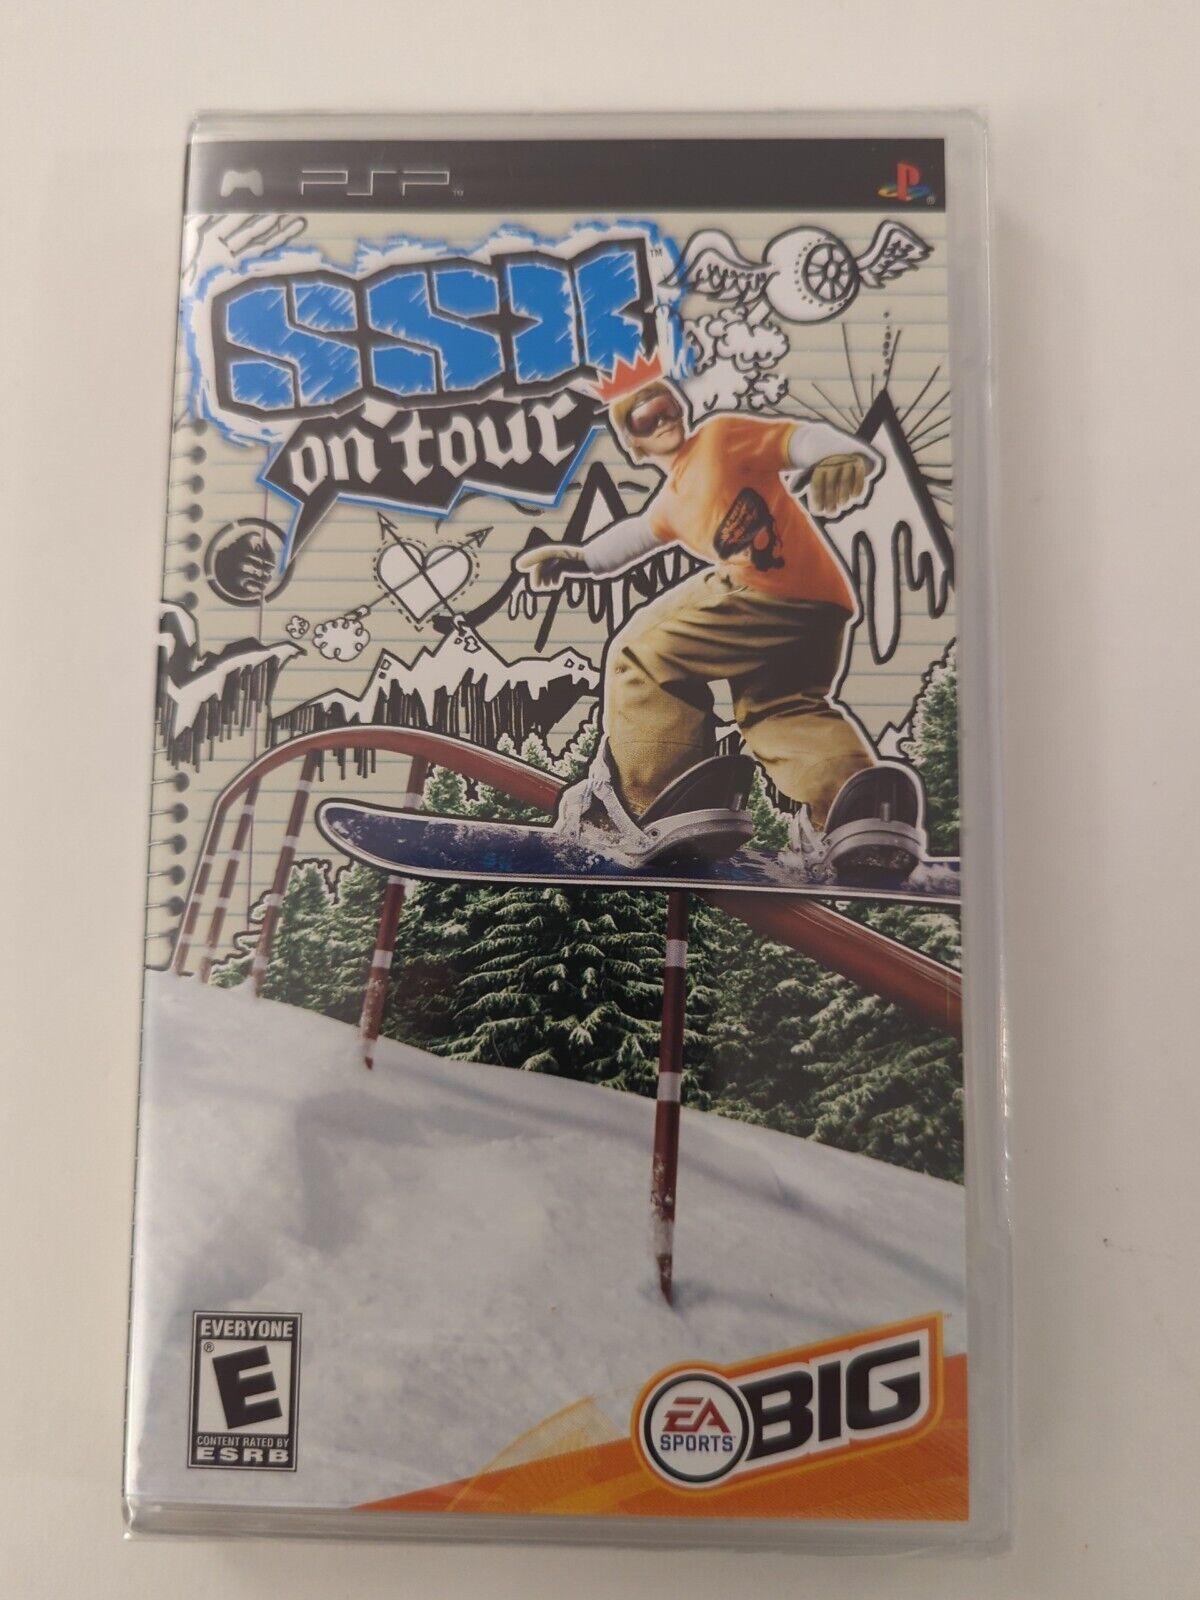 SSXOn Tour Playstation Portable Sony PSP - New Factory Sealed